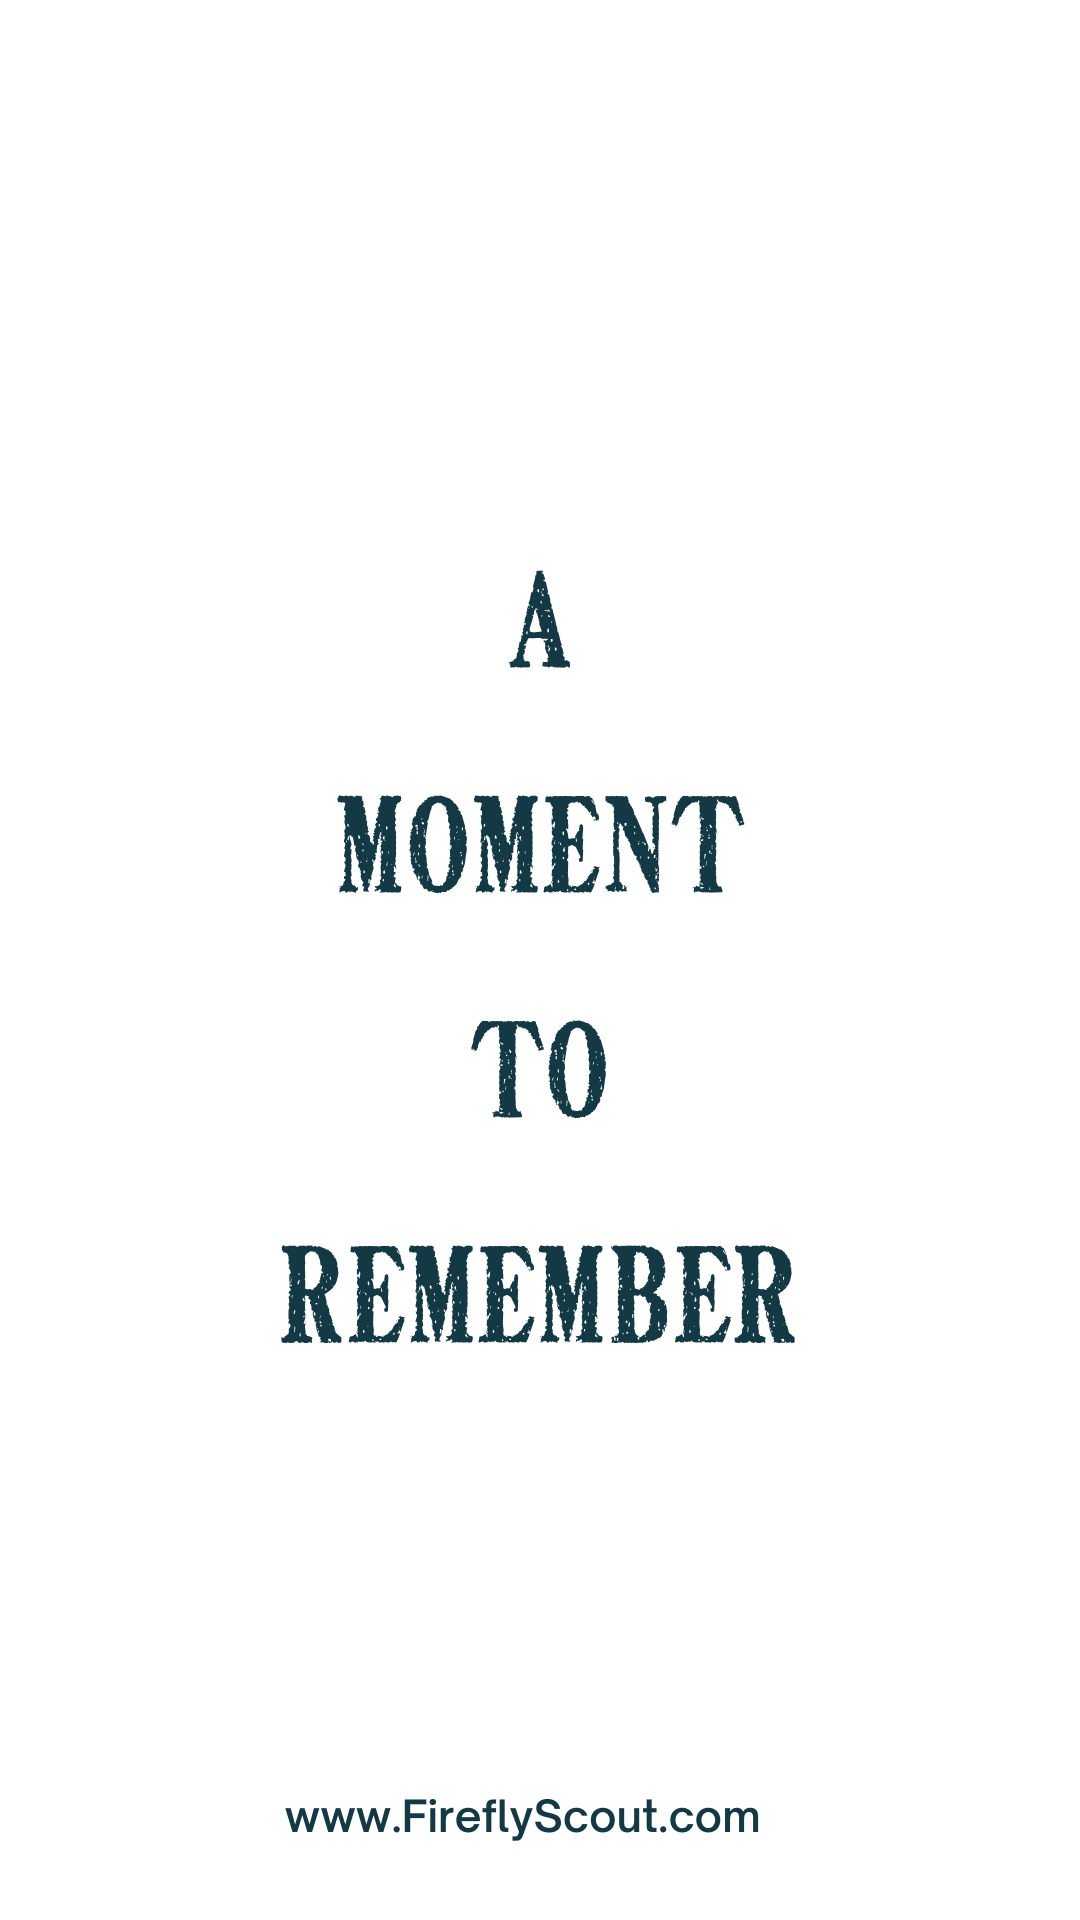 A moment to remember